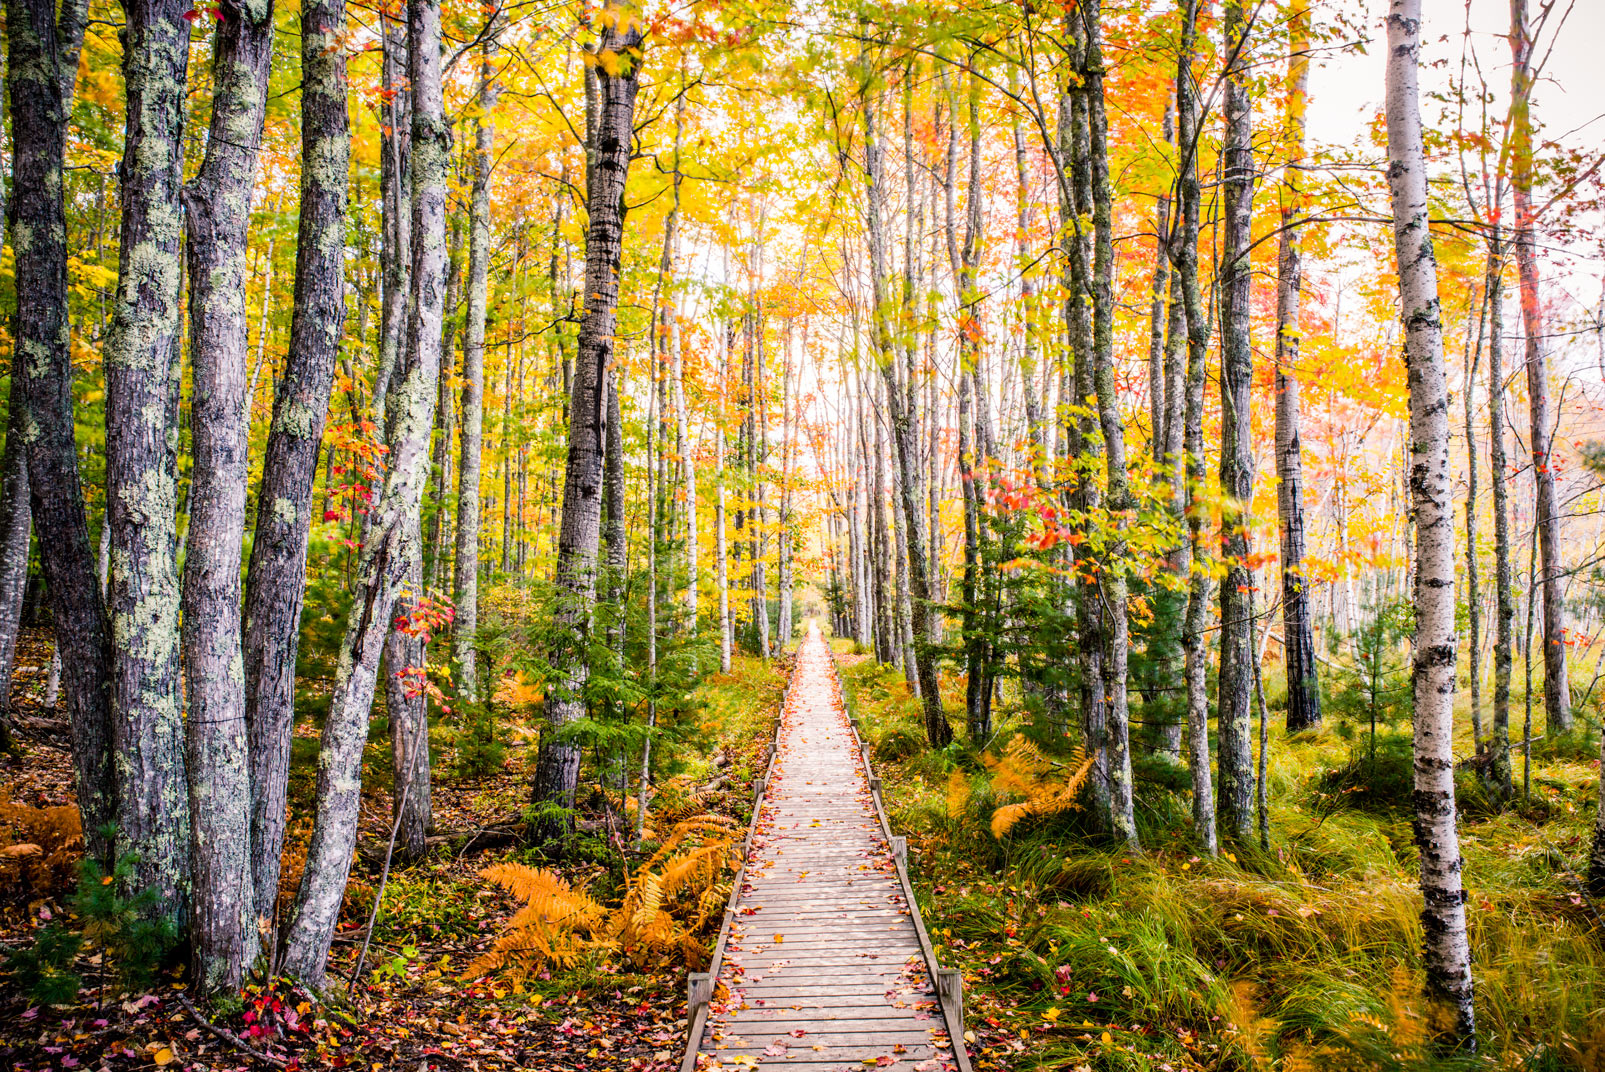 Acadia National Park in Maine became the first national park east of the Mississippi River in 1919. The park features a rugged coastline, the tallest point on the North Atlantic seaboard, and more than 100 miles of hiking trails with stellar views, like this scene from Jessup Path in fall. Photo © Nick Hall